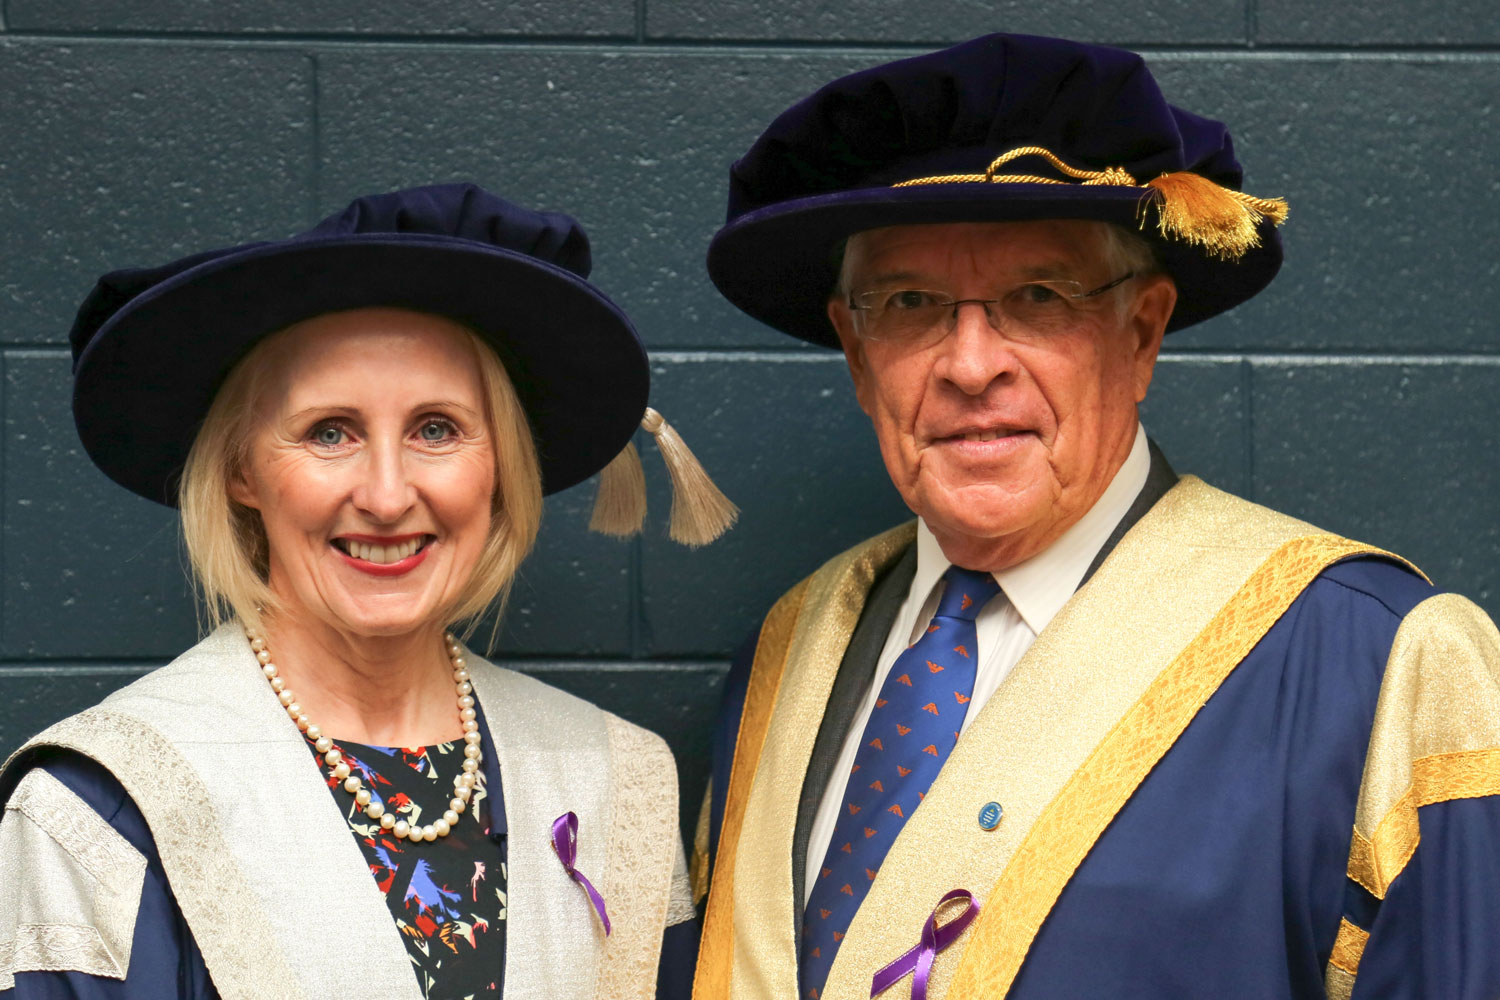 The Vice Chancellor and the Chancellor smile at the camera